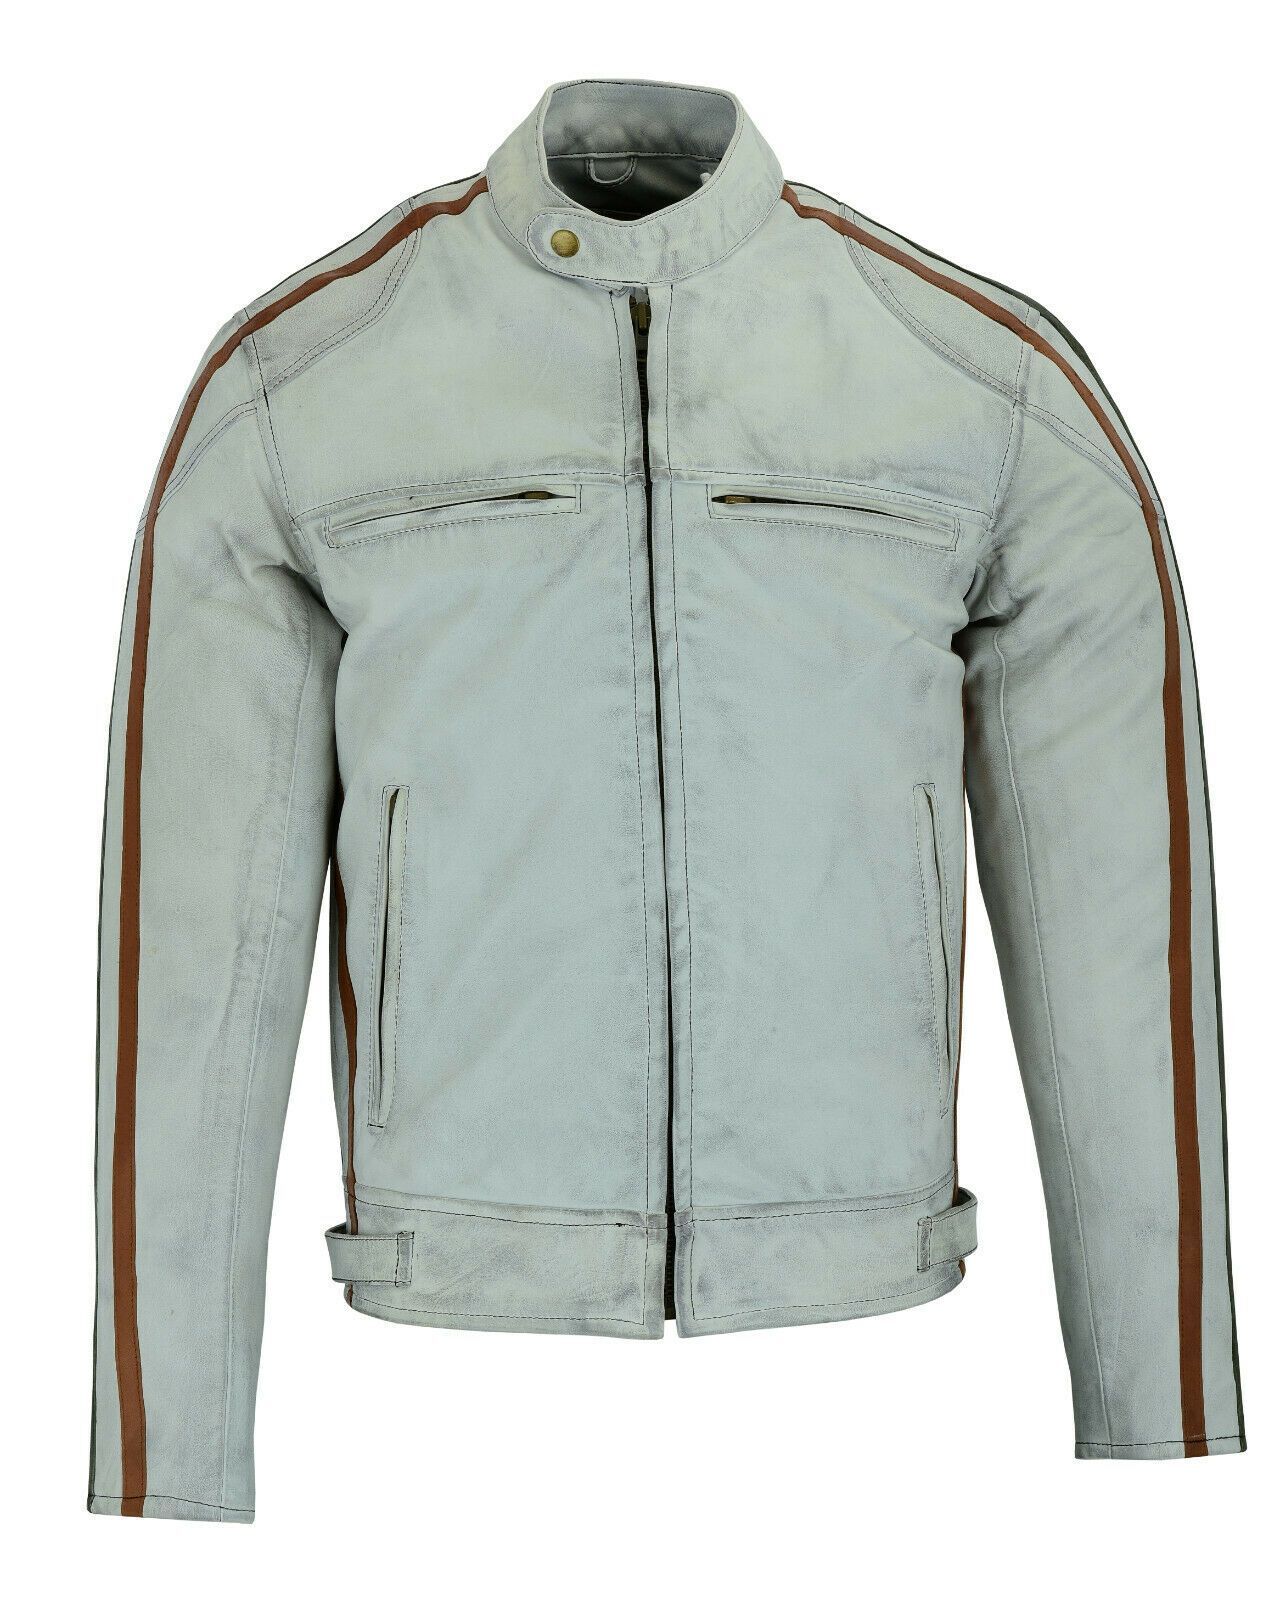 Classic Mens Dirty Grey Motorcycle Leather Jacket Biker Tan and Green stripes